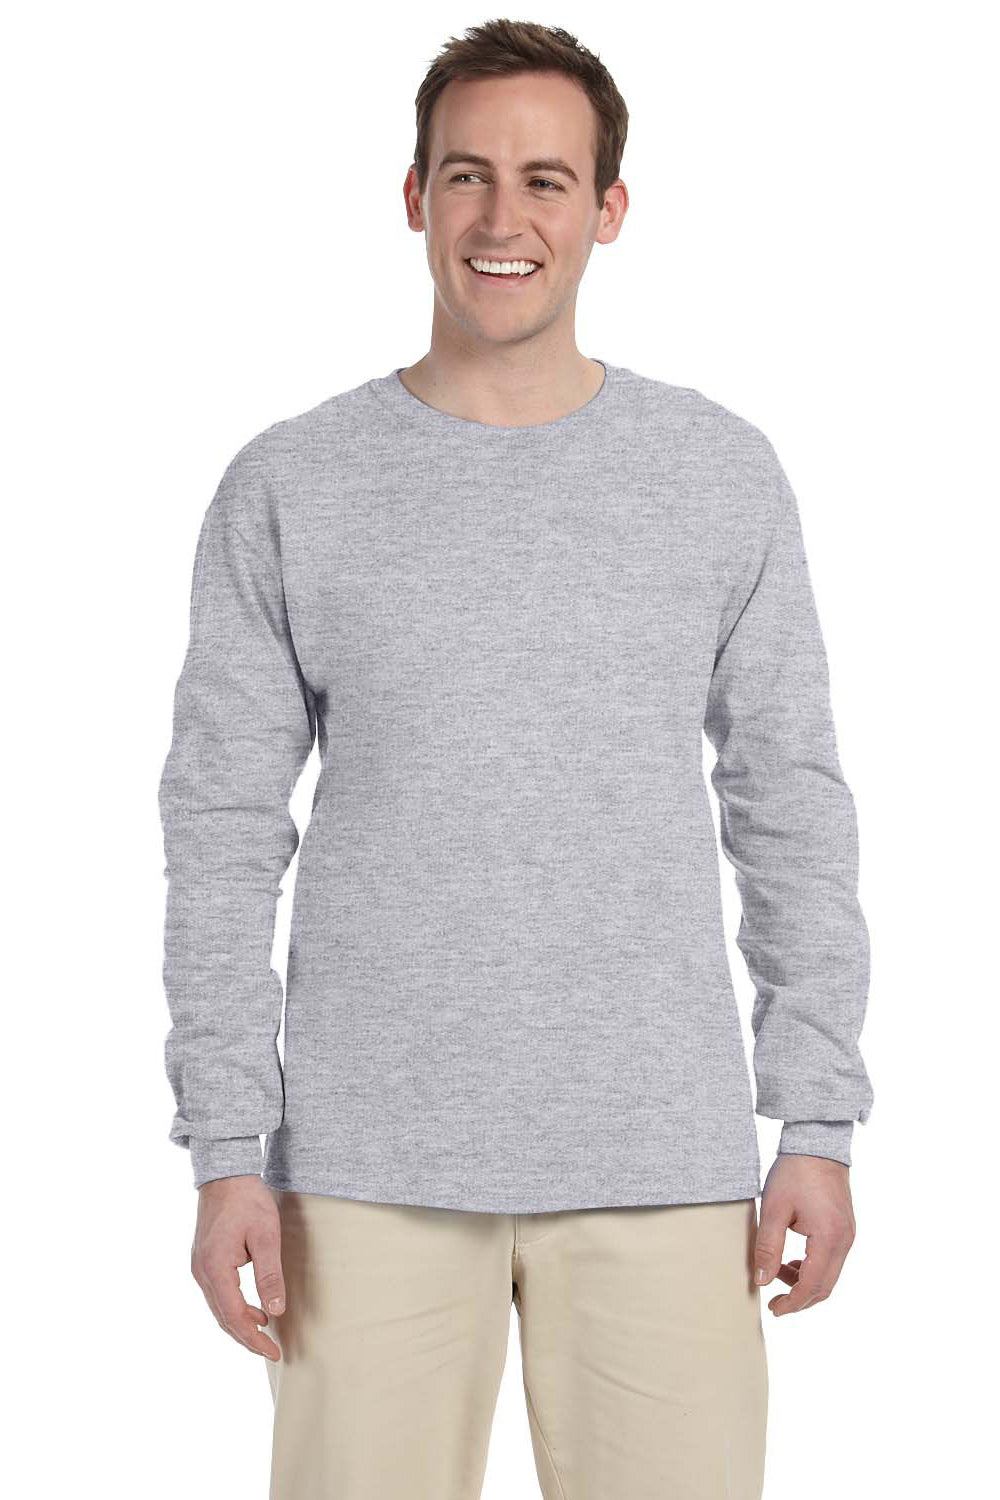 Fruit Of The Loom 4930 Mens HD Jersey Long Sleeve Crewneck T-Shirt Heather Grey Front